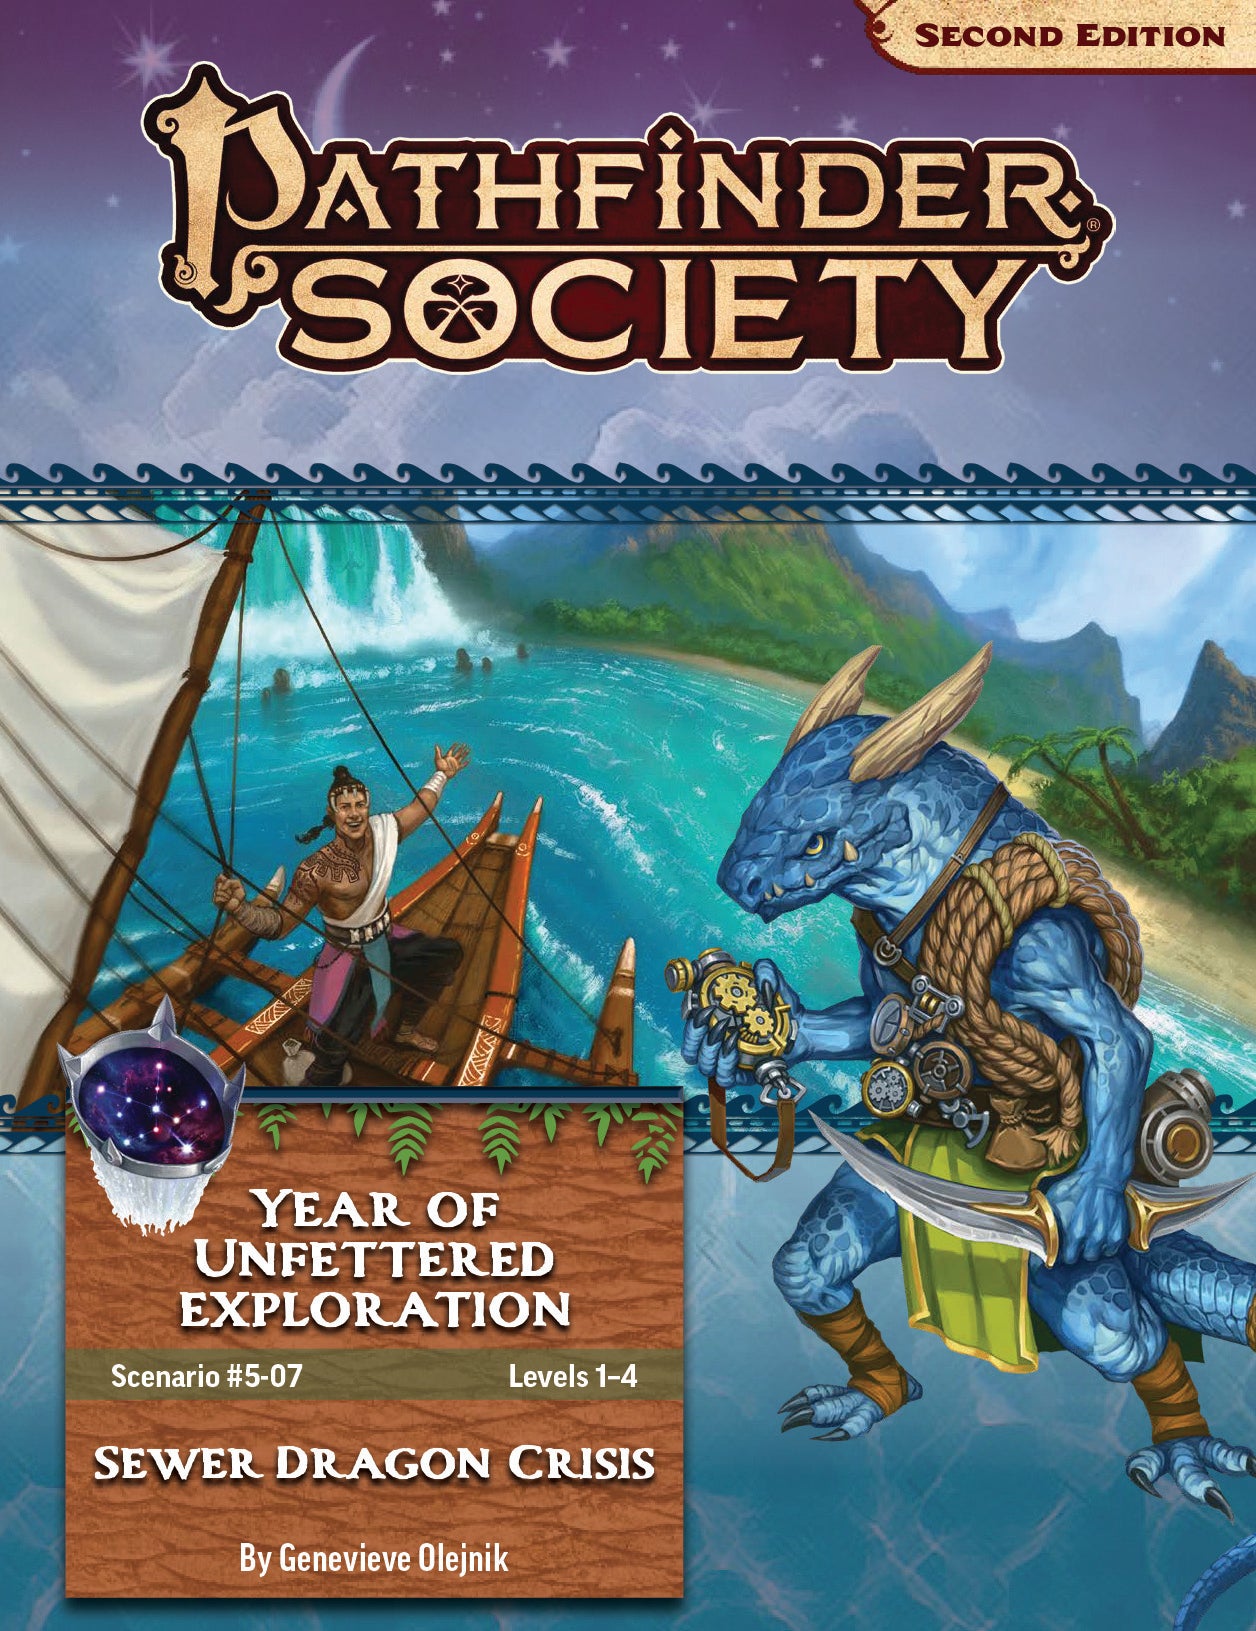 Pathfinder Society Year of Unfettered Exploration: Sewer Dragon Crisis